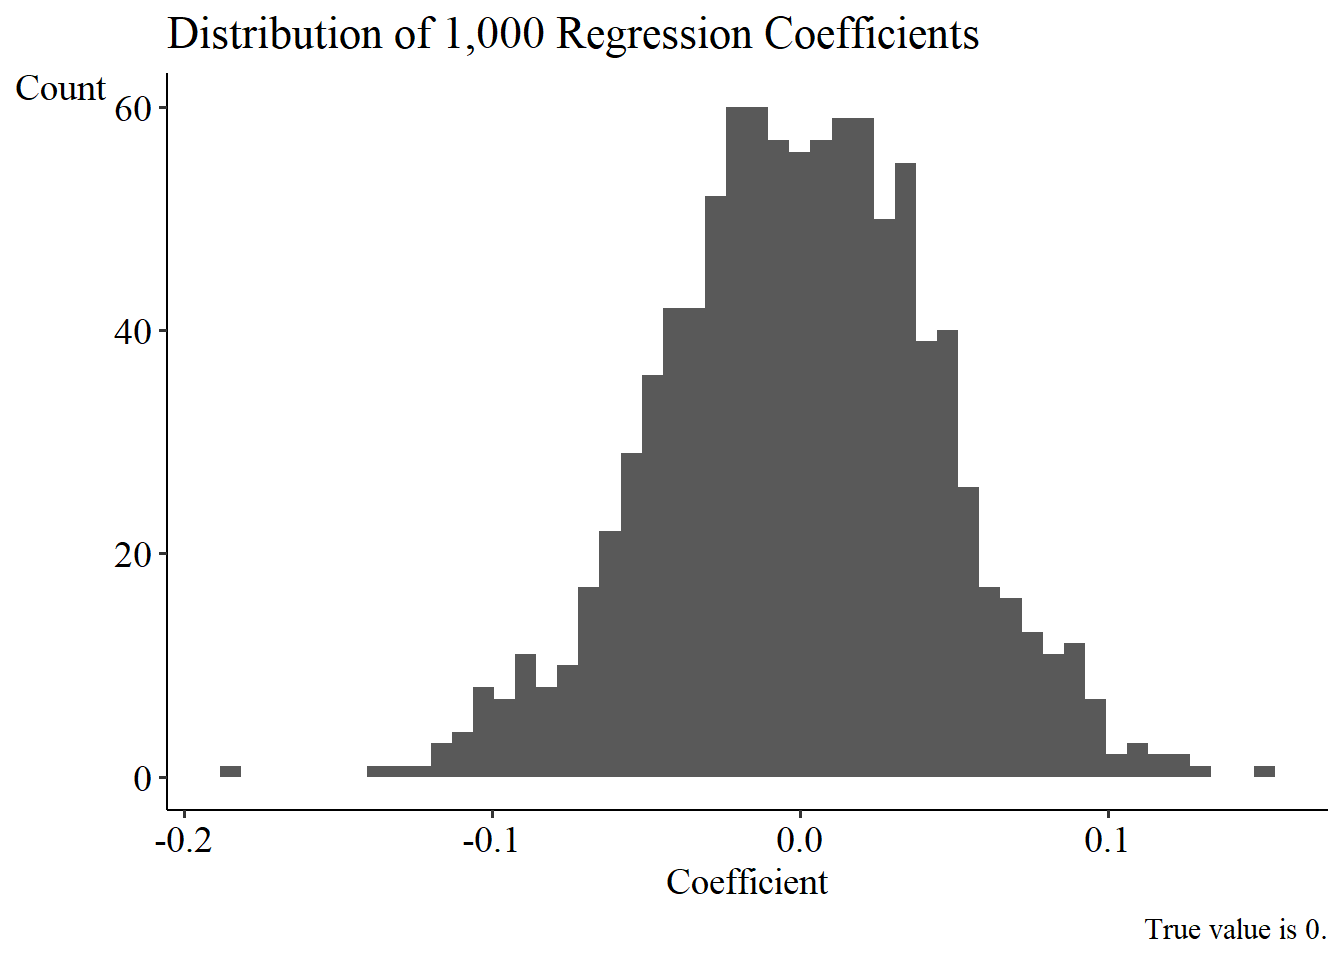 A histogram showing the distribution of 1000 regression coefficients generated from fake data.